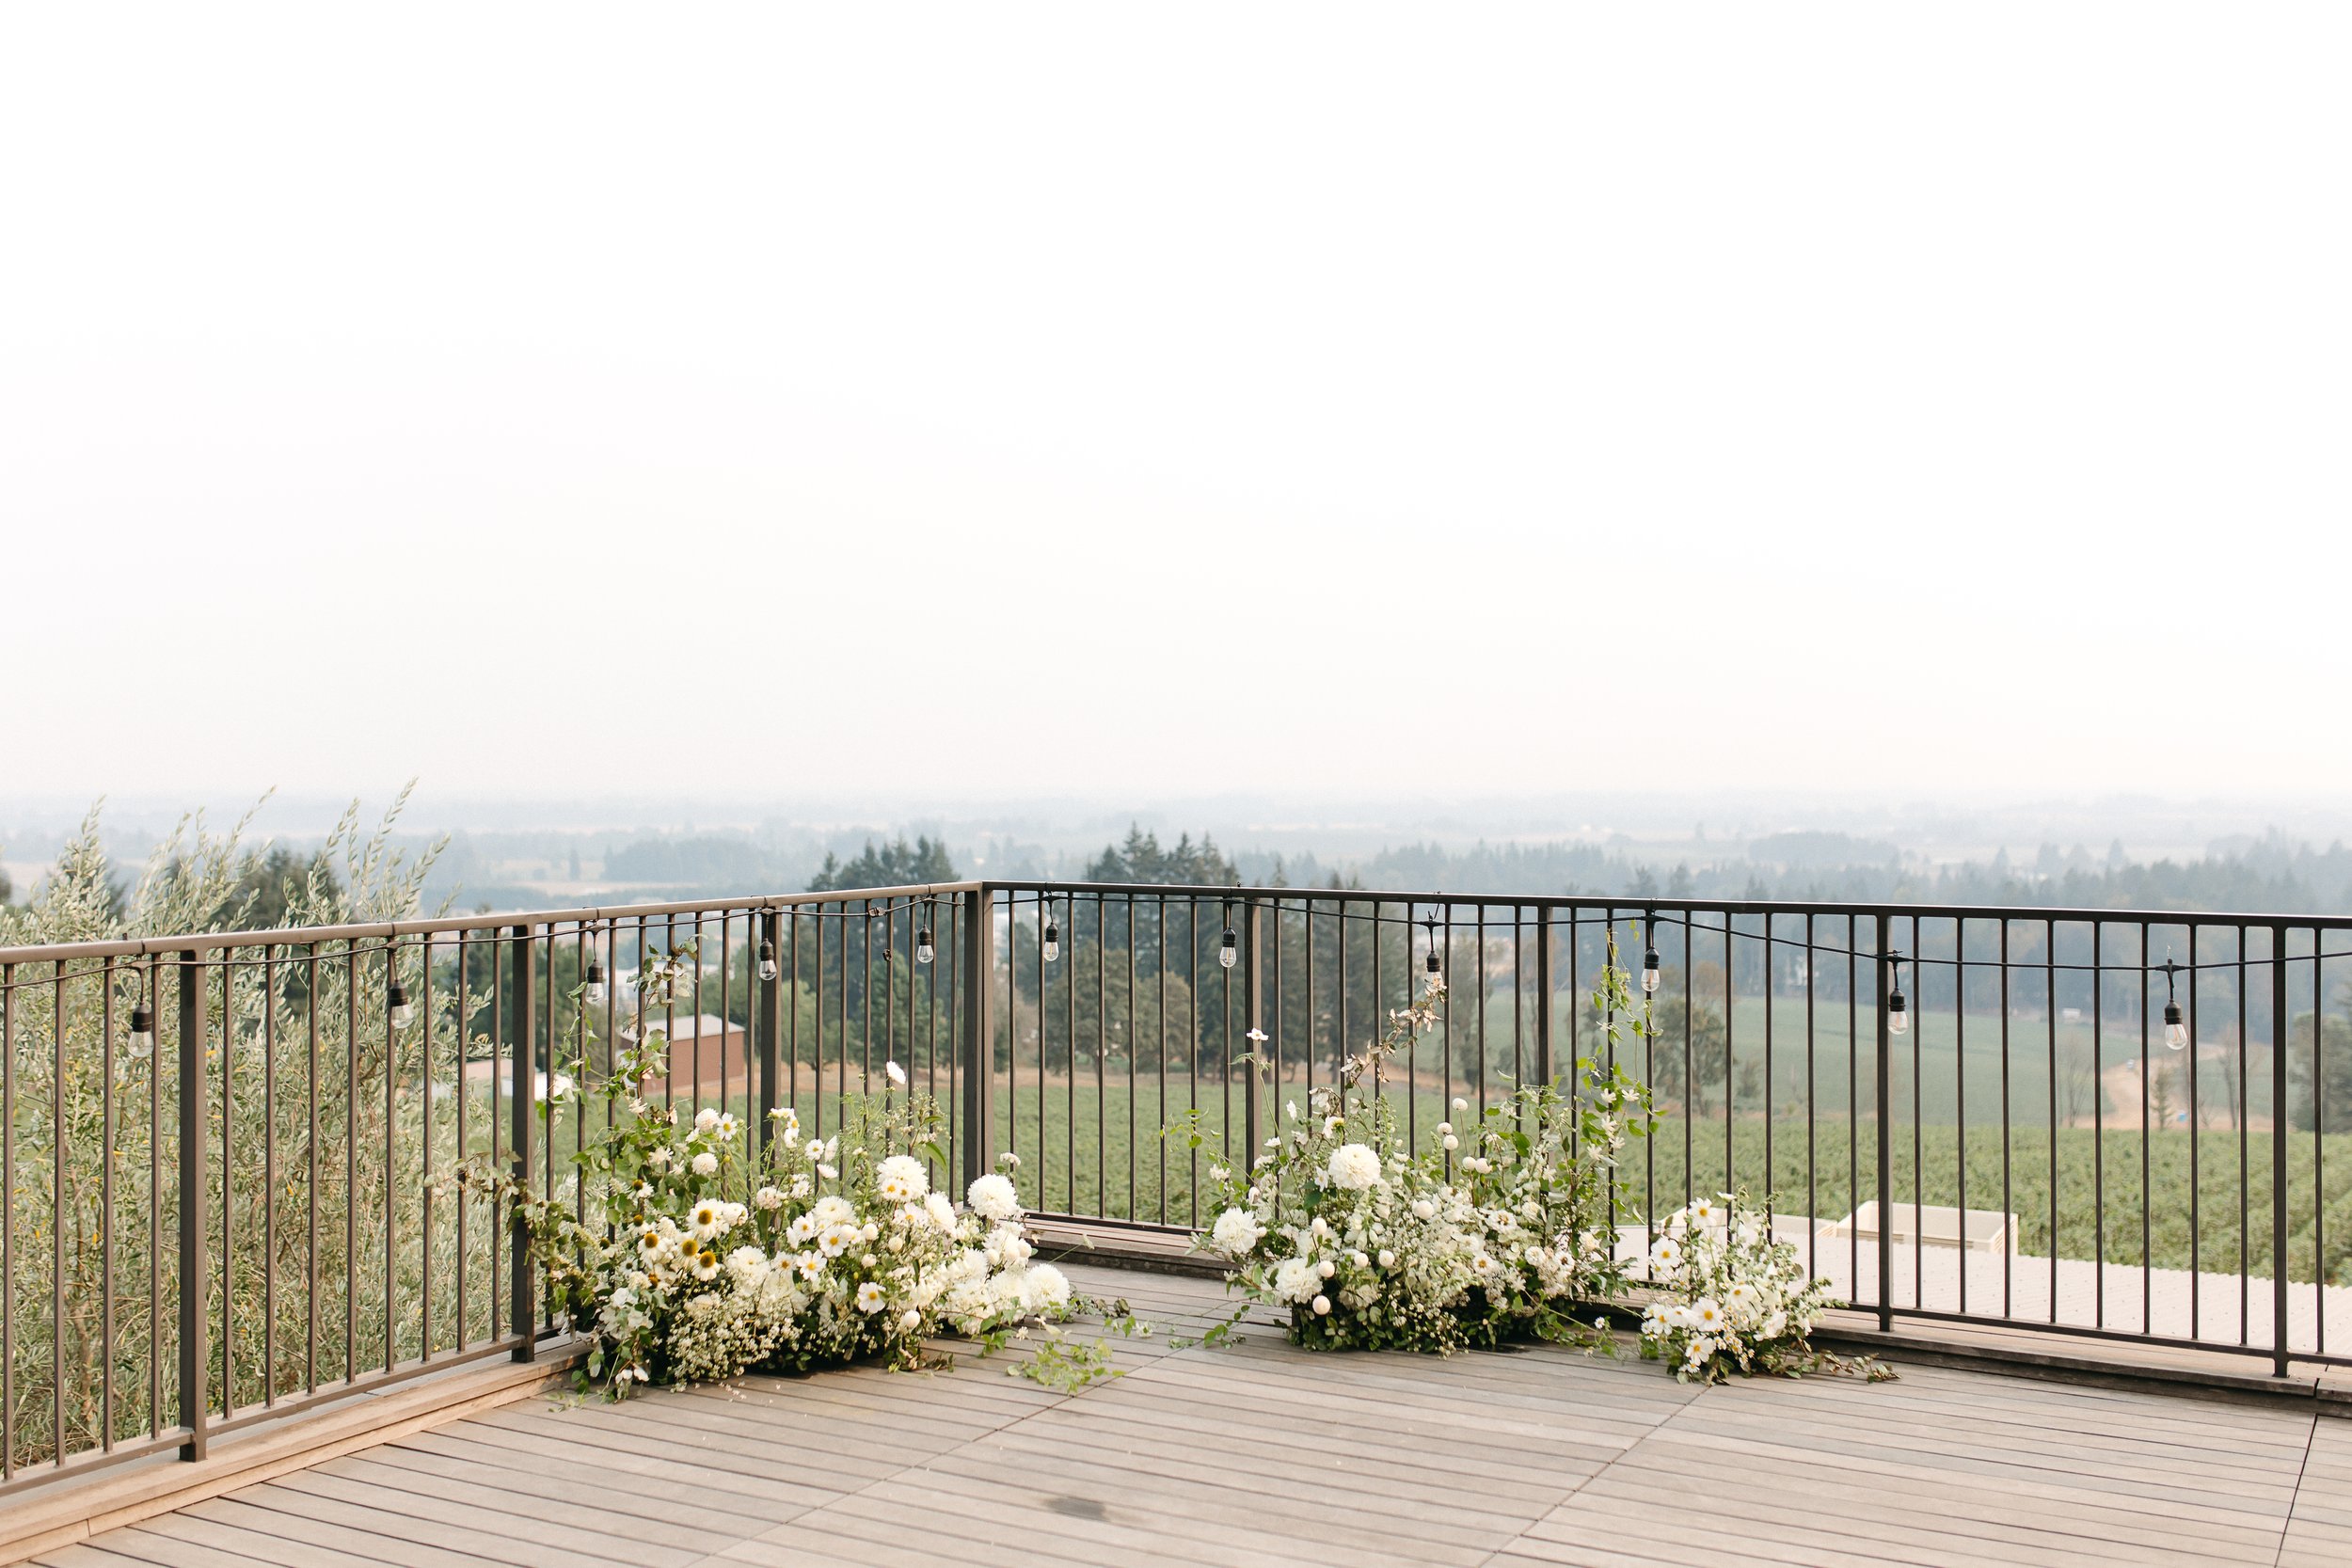  Oregon winery micro wedding, white and green florals, deck wedding, Oregon film wedding photographer, domaine roy and fils 